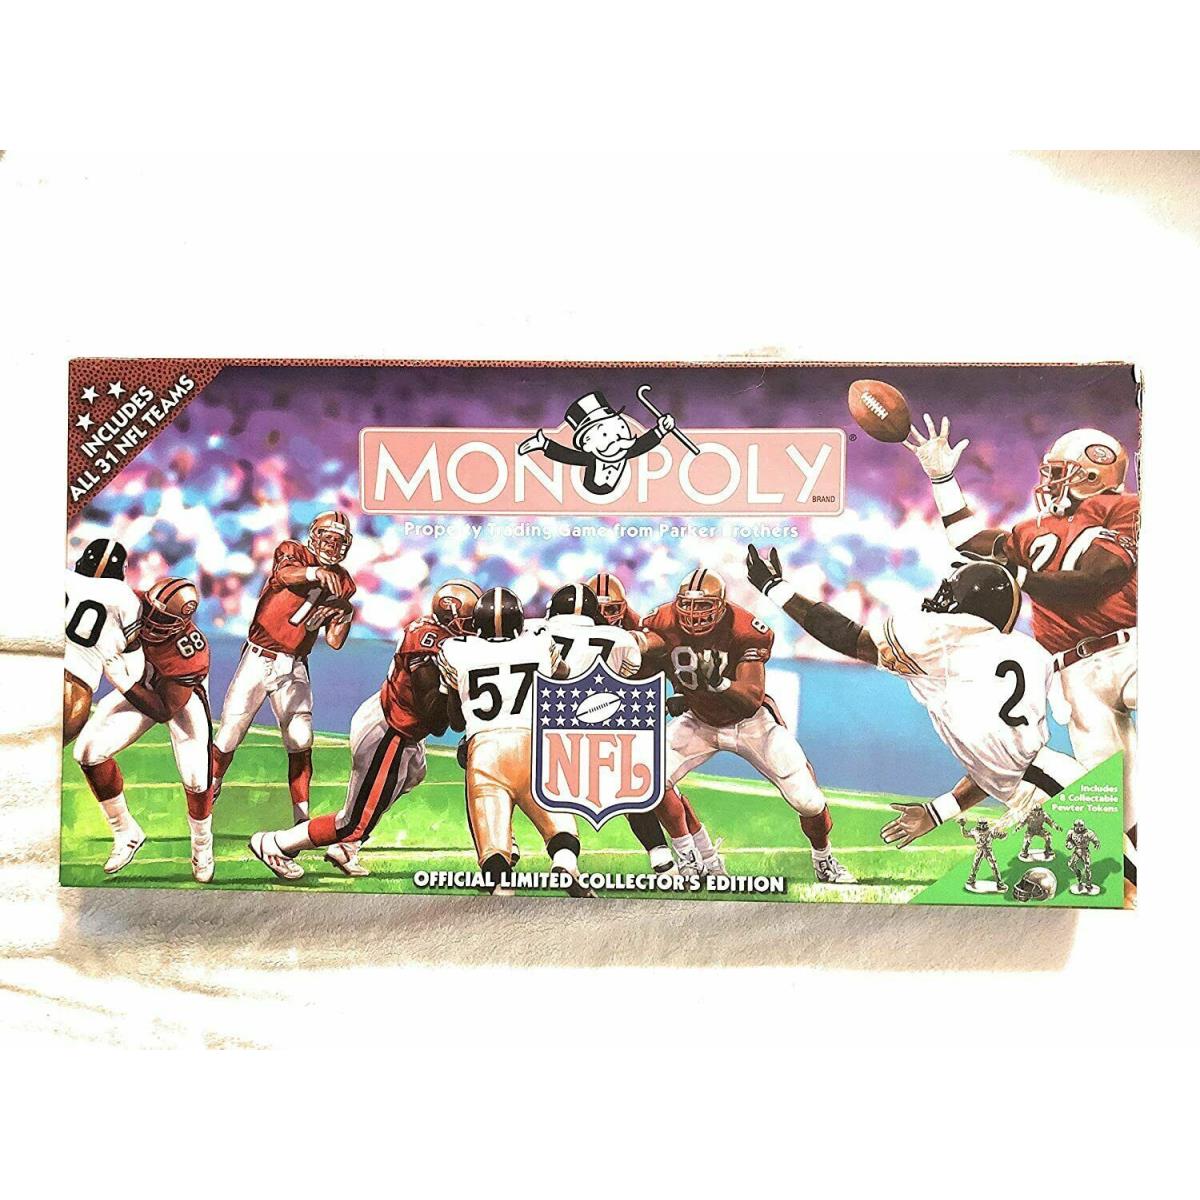 Hasbro Nfl Official Limited Monopoly Board Game M4C 31 Teams 1998